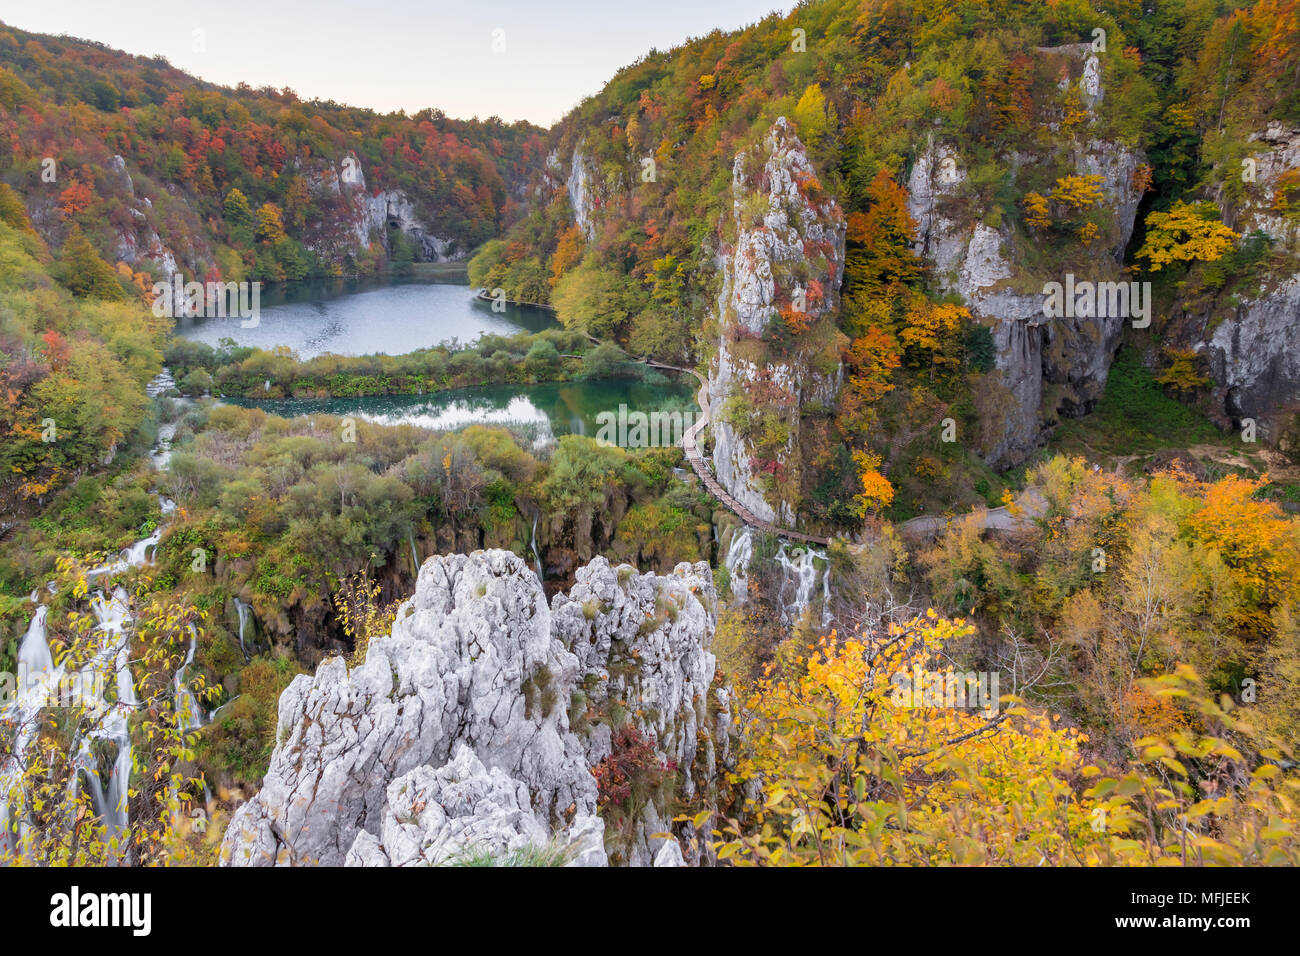 View from a lookout inside Plitvice Lakes National Park over the Lower Lakes, UNESCO World Heritage Site, Croatia, Europe Stock Photo